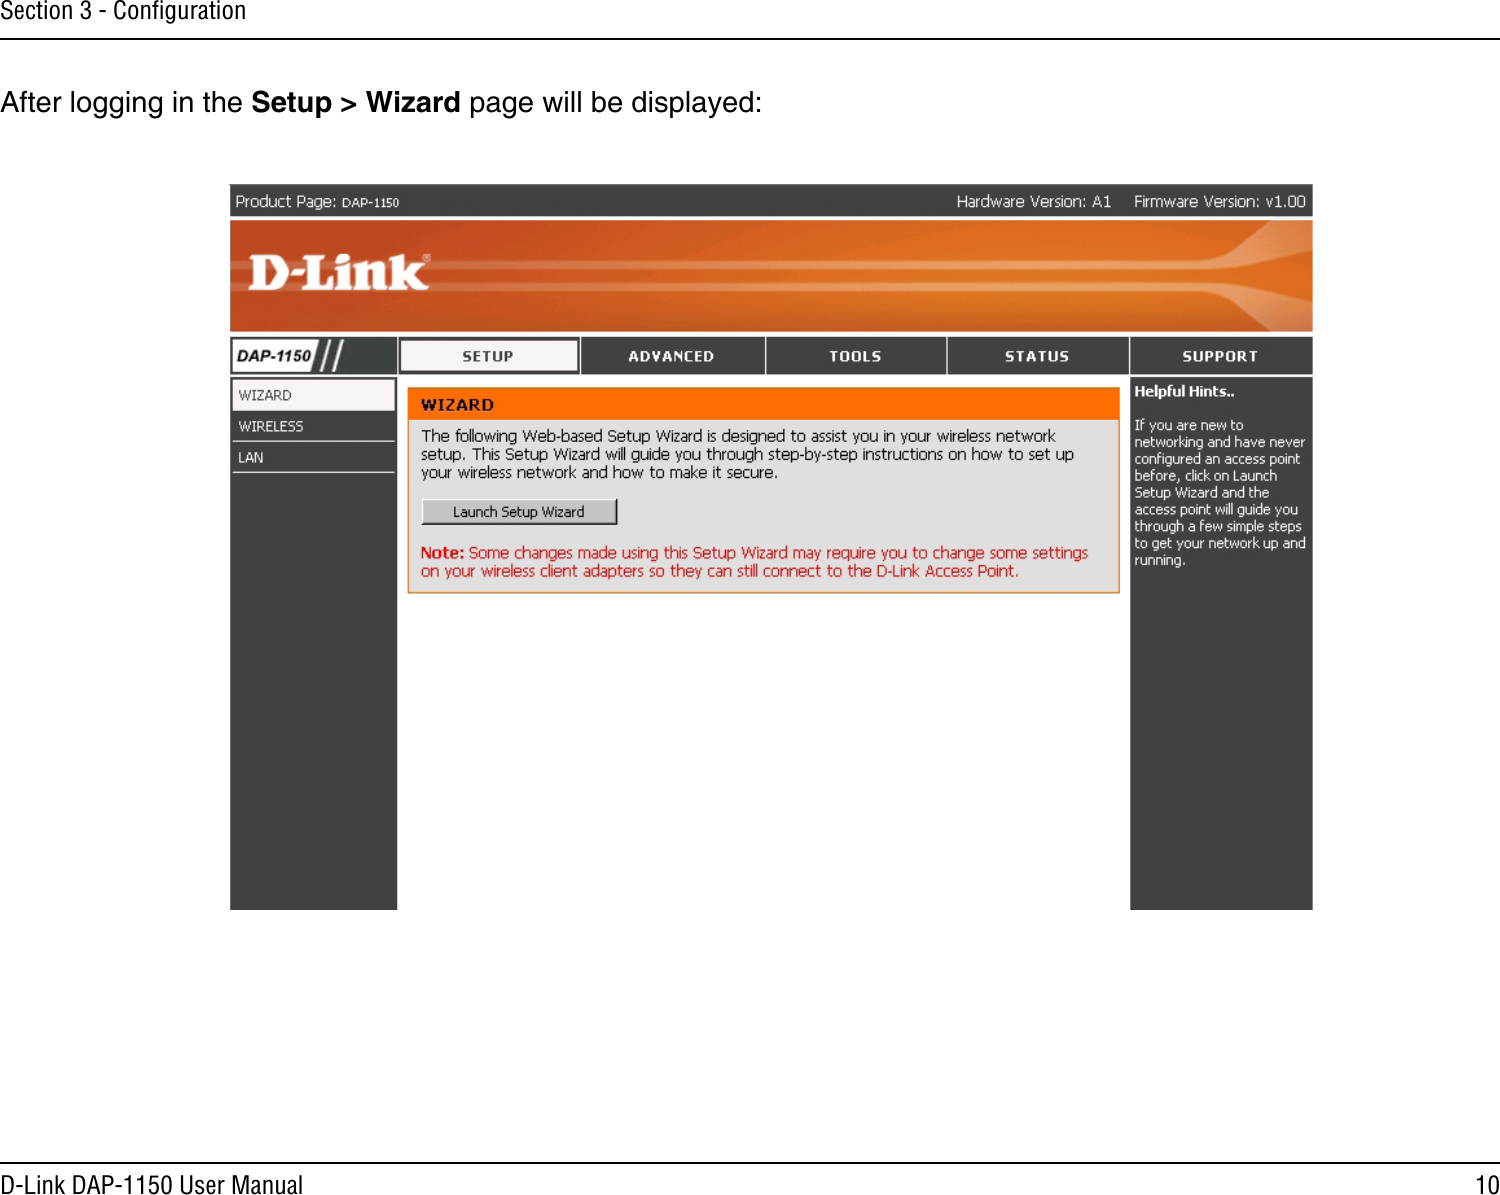 10D-Link DAP-1150 User ManualSection 3 - ConﬁgurationAfter logging in the Setup &gt; Wizard page will be displayed: